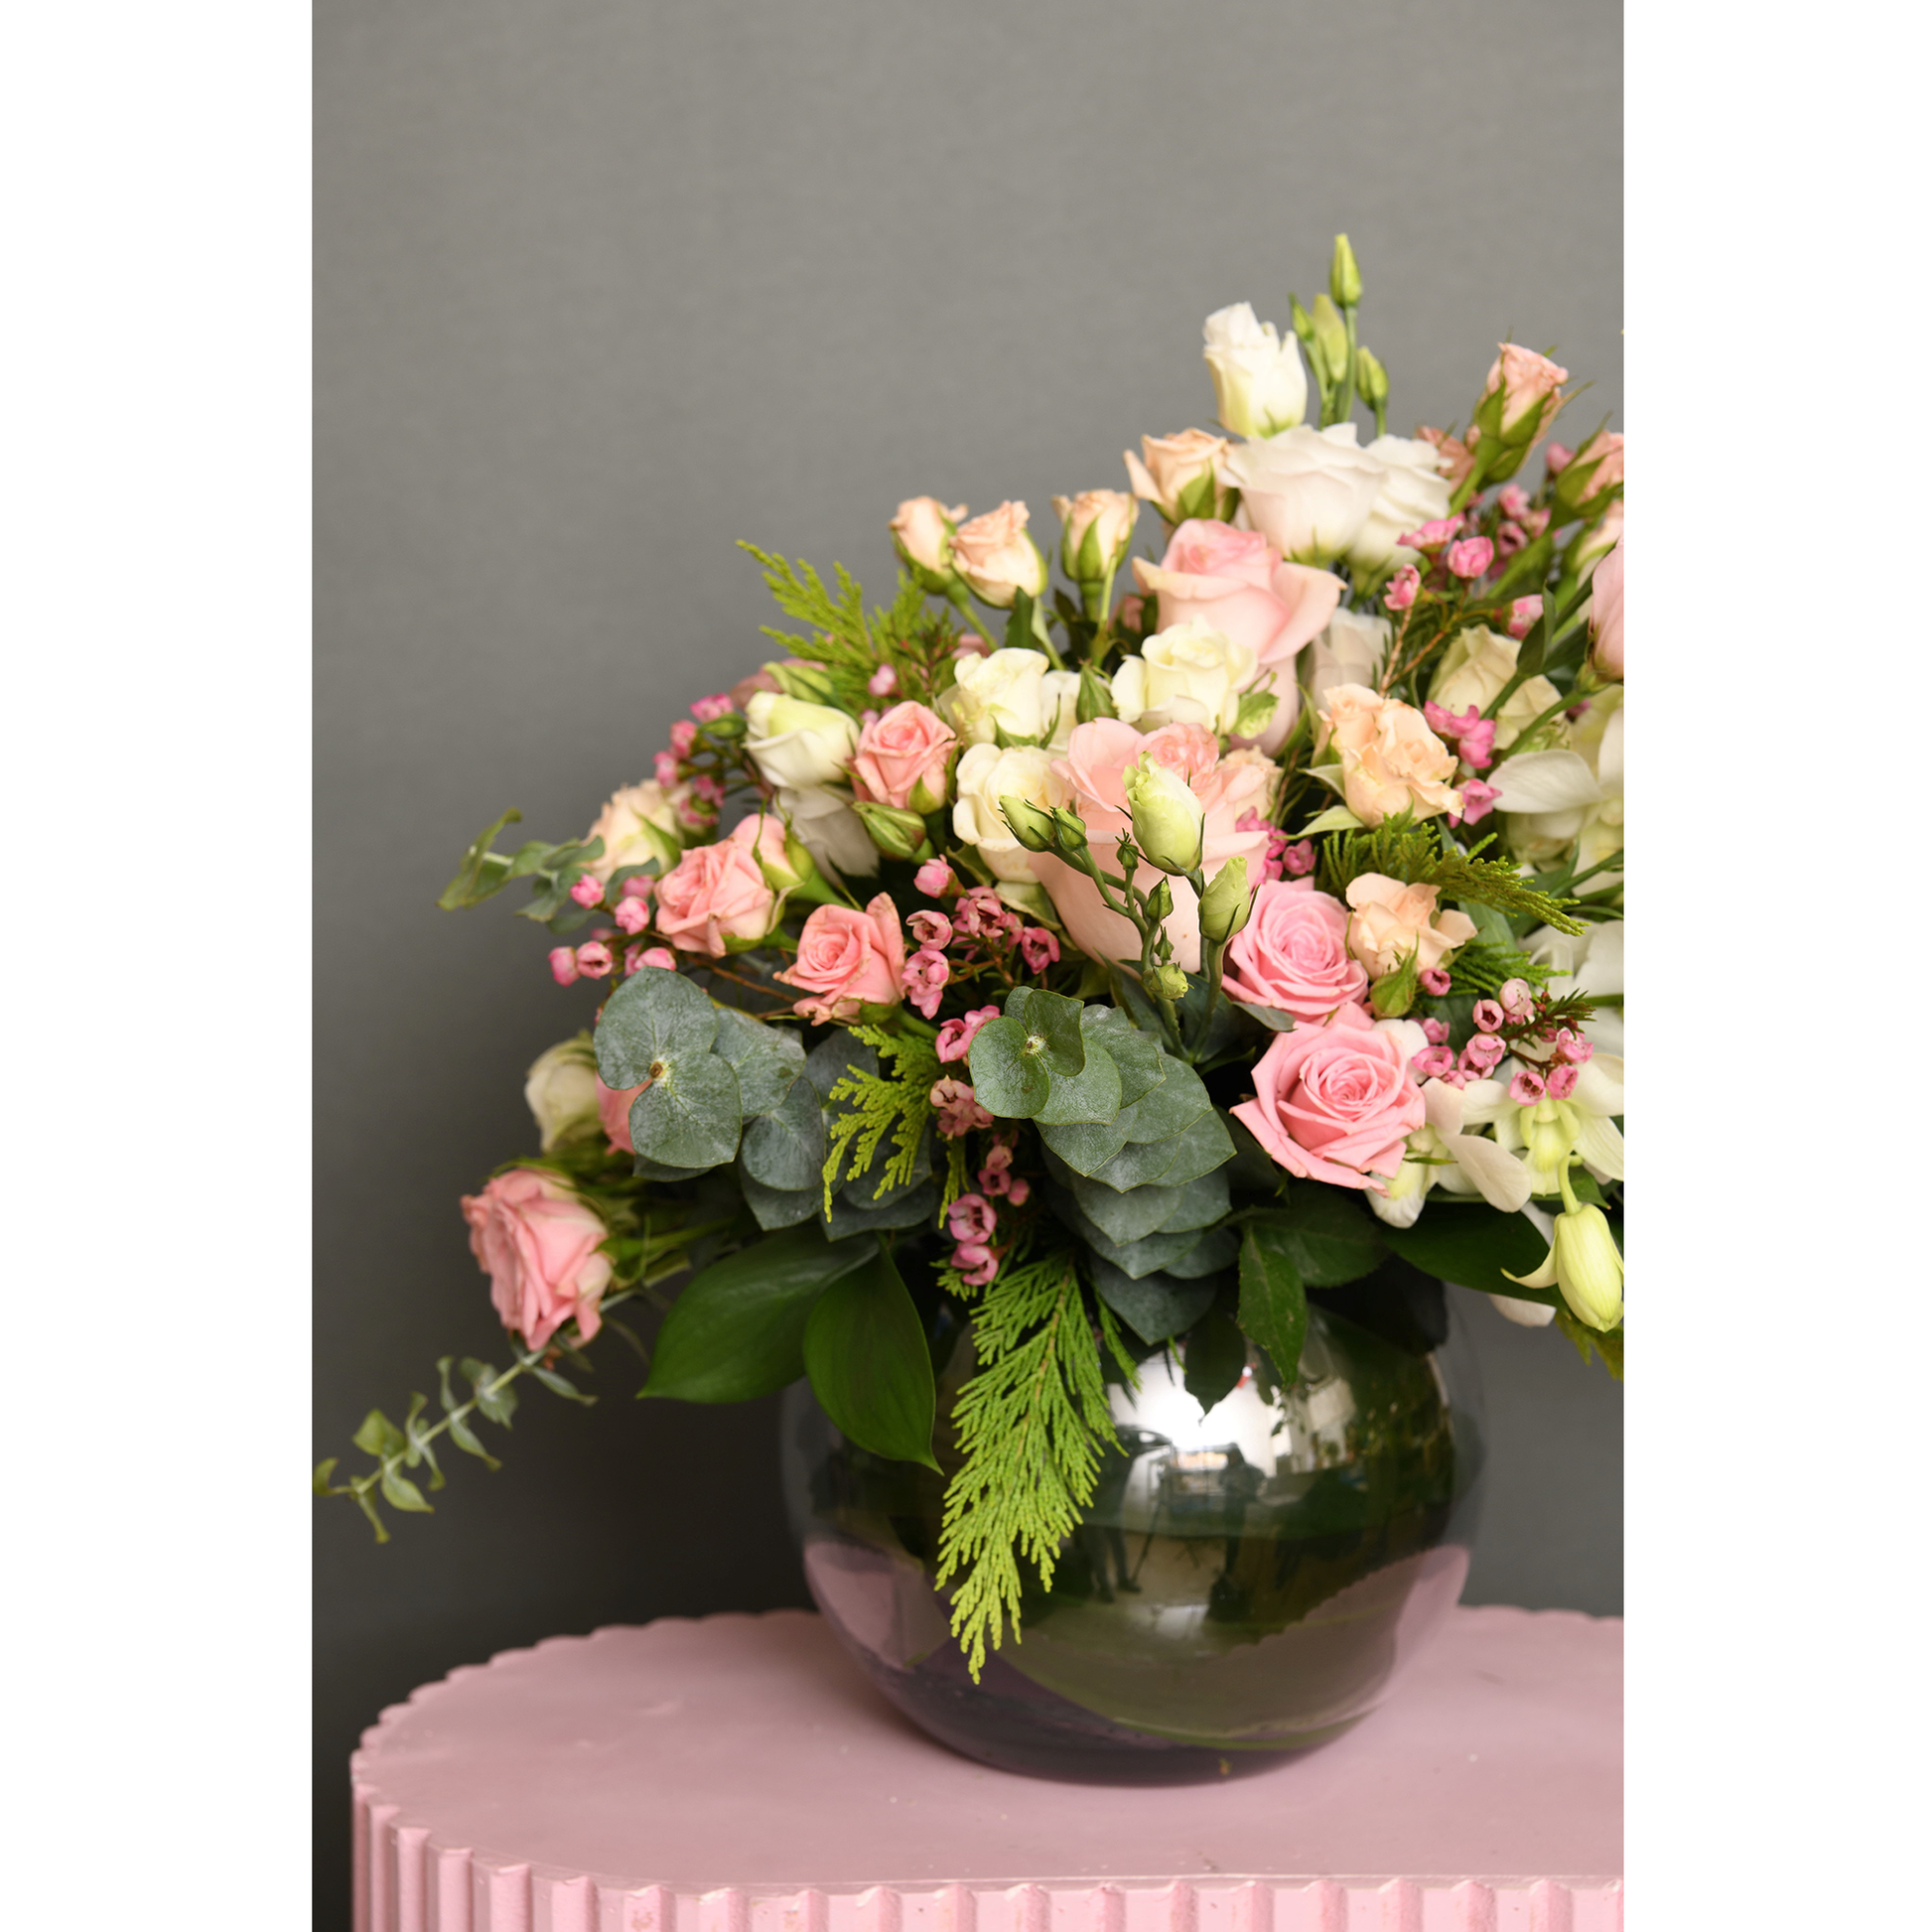 Vase of roses, baby rose, wax flower, astomaea, and orchid